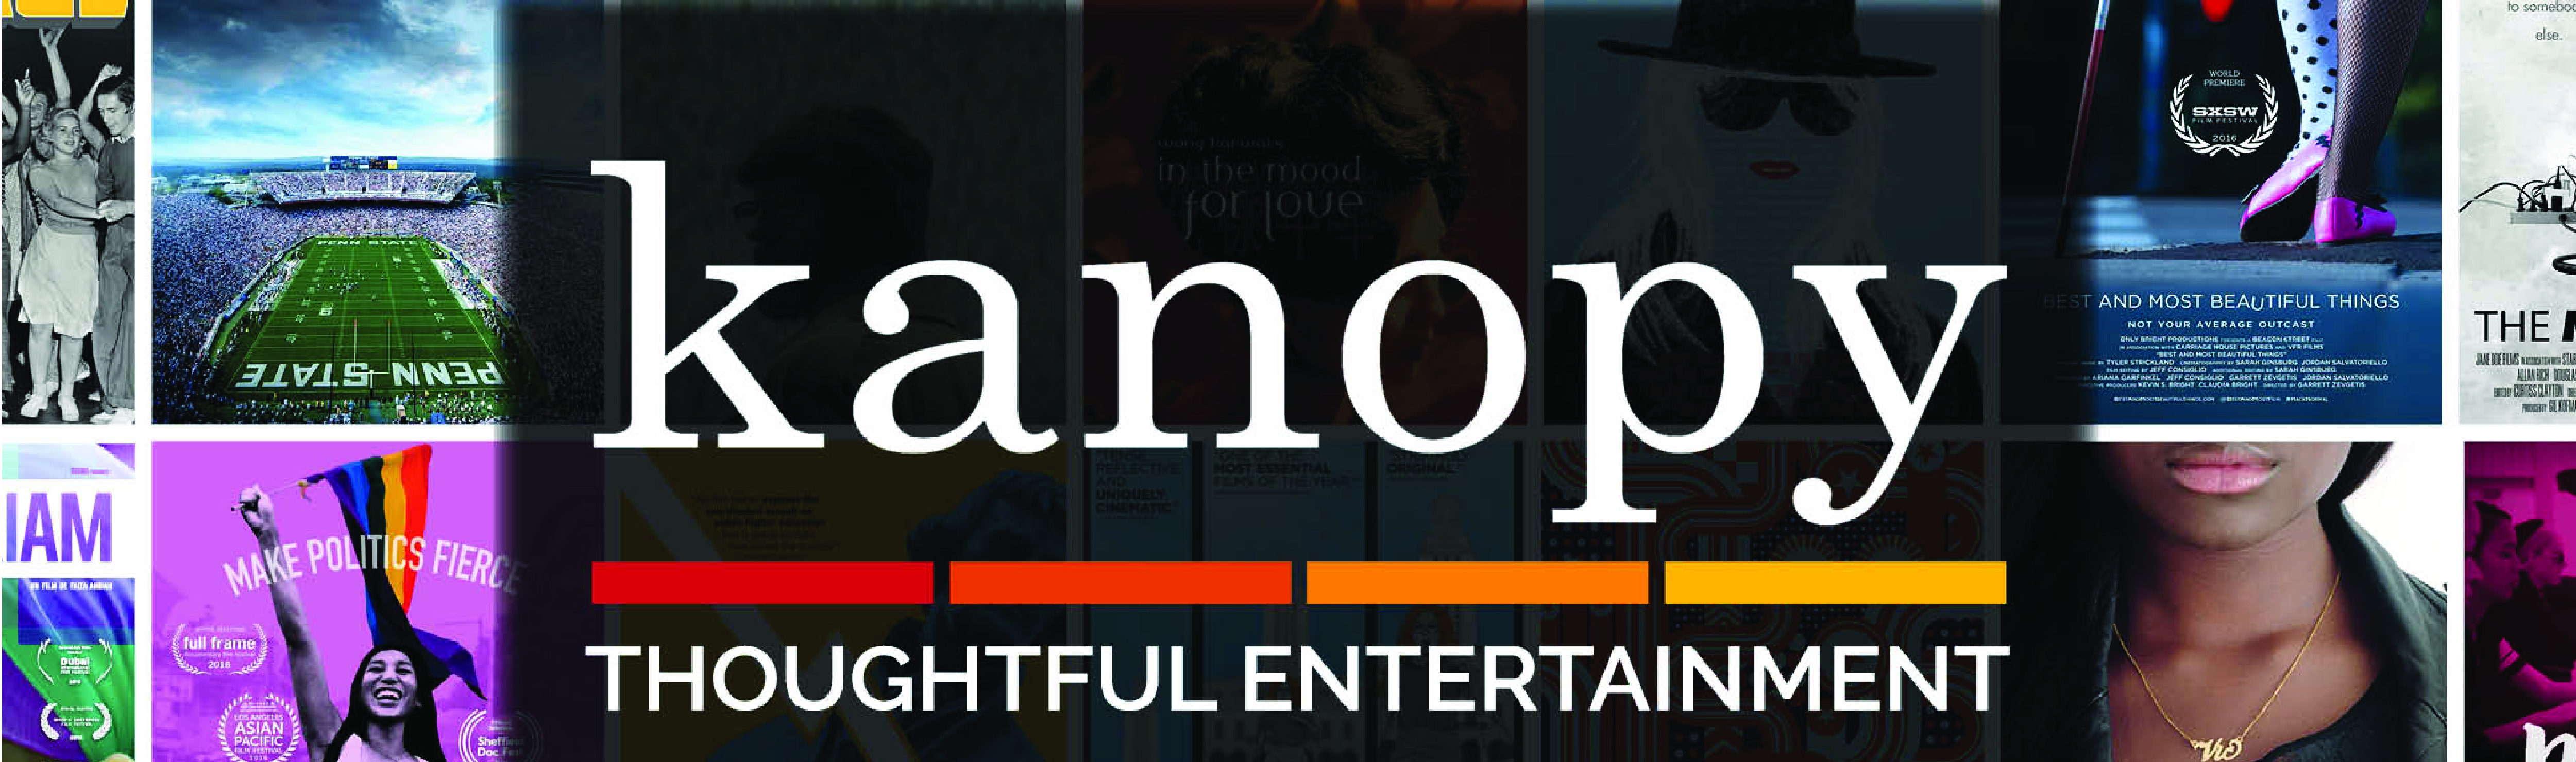 New Movie Streaming Service: Kanopy, Fountaindale Public Library